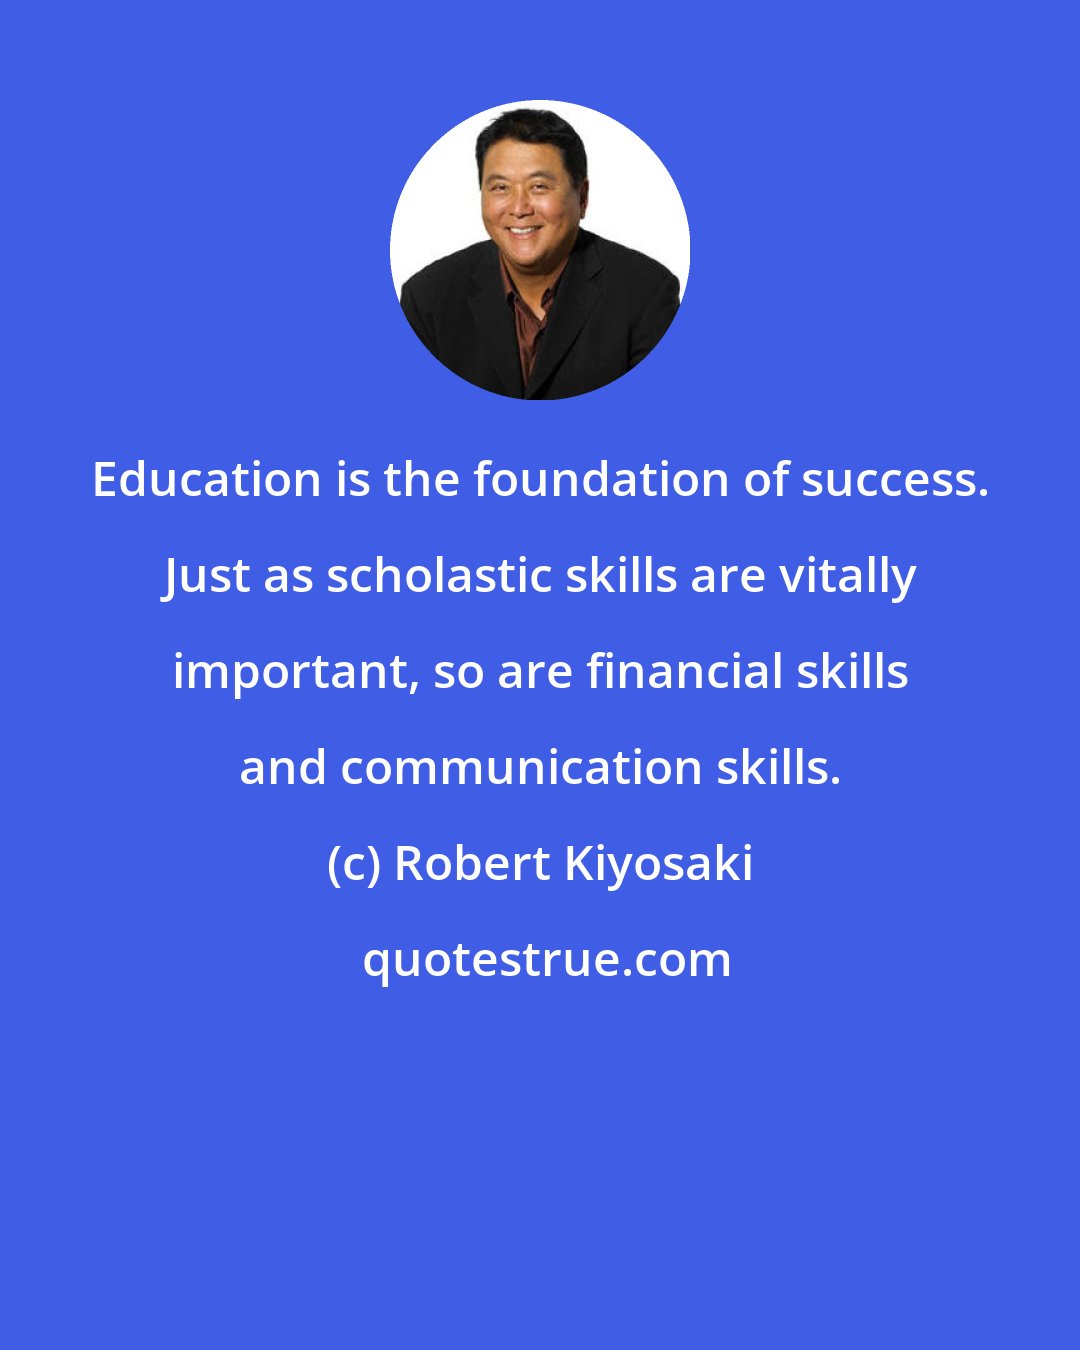 Robert Kiyosaki: Education is the foundation of success. Just as scholastic skills are vitally important, so are financial skills and communication skills.